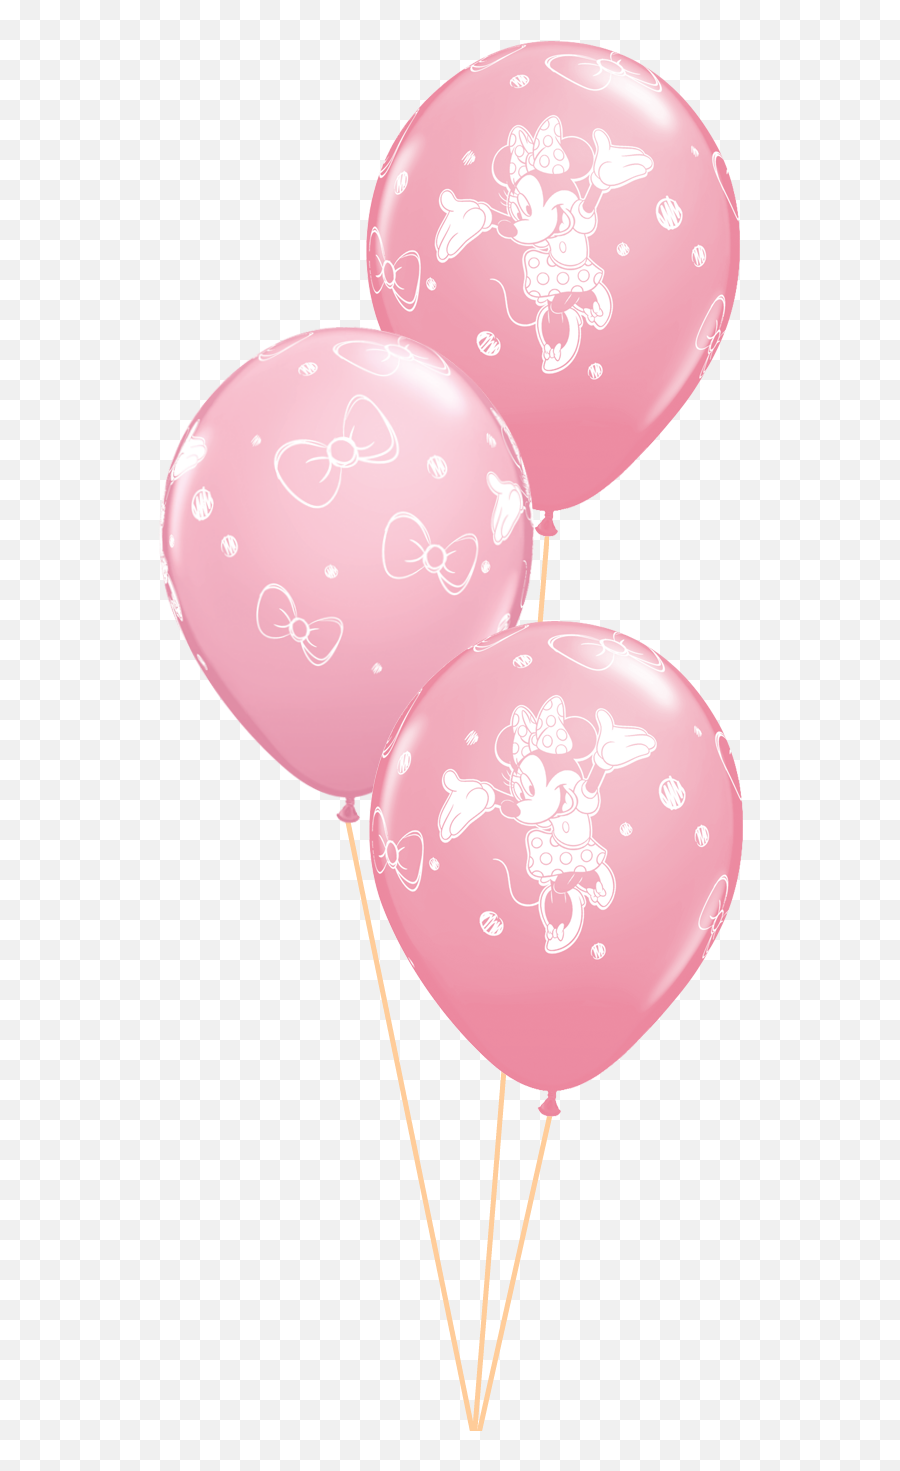 Download Pink Minnie Mouse Balloons Hd Png - Uokplrs Minnie Mouse Birthday Balloons Png,Minnie Mouse Pink Png